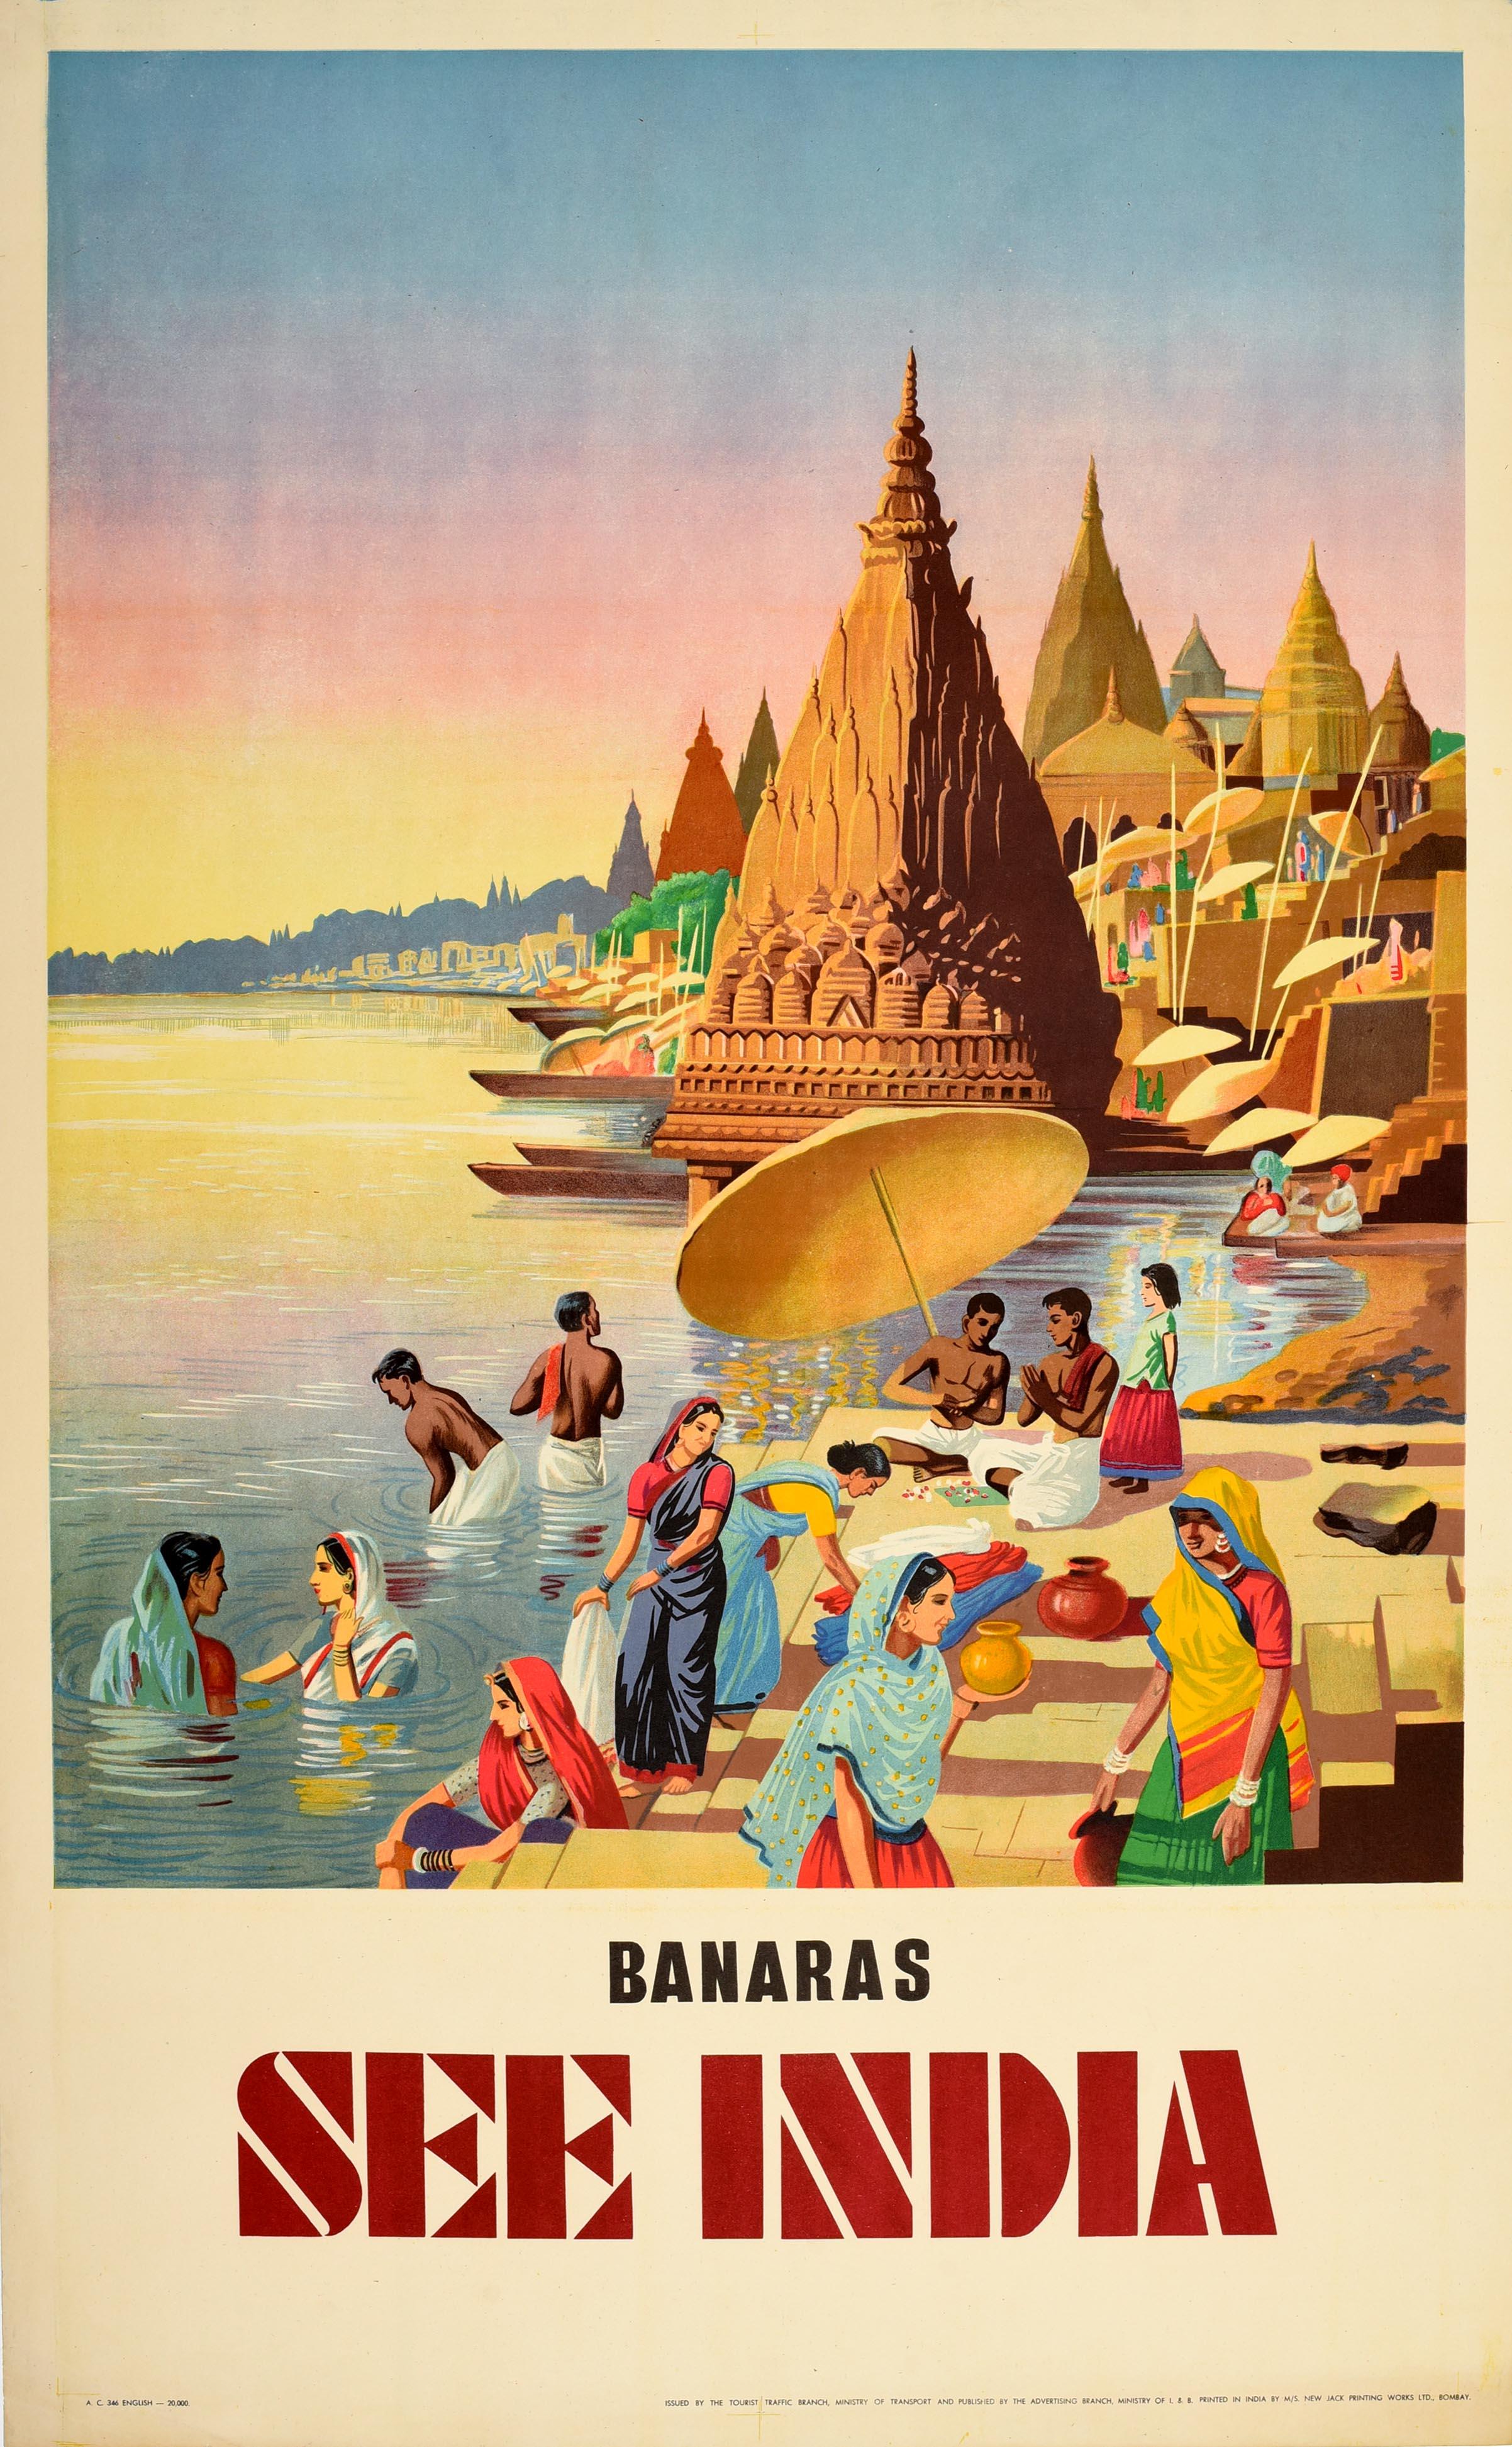 Original vintage travel poster for Varanasi / Banaras See India featuring a colourful image of men and ladies wearing traditional clothing and sari dresses, some holding umbrellas against the sun and some bathing in the river on the ghats /